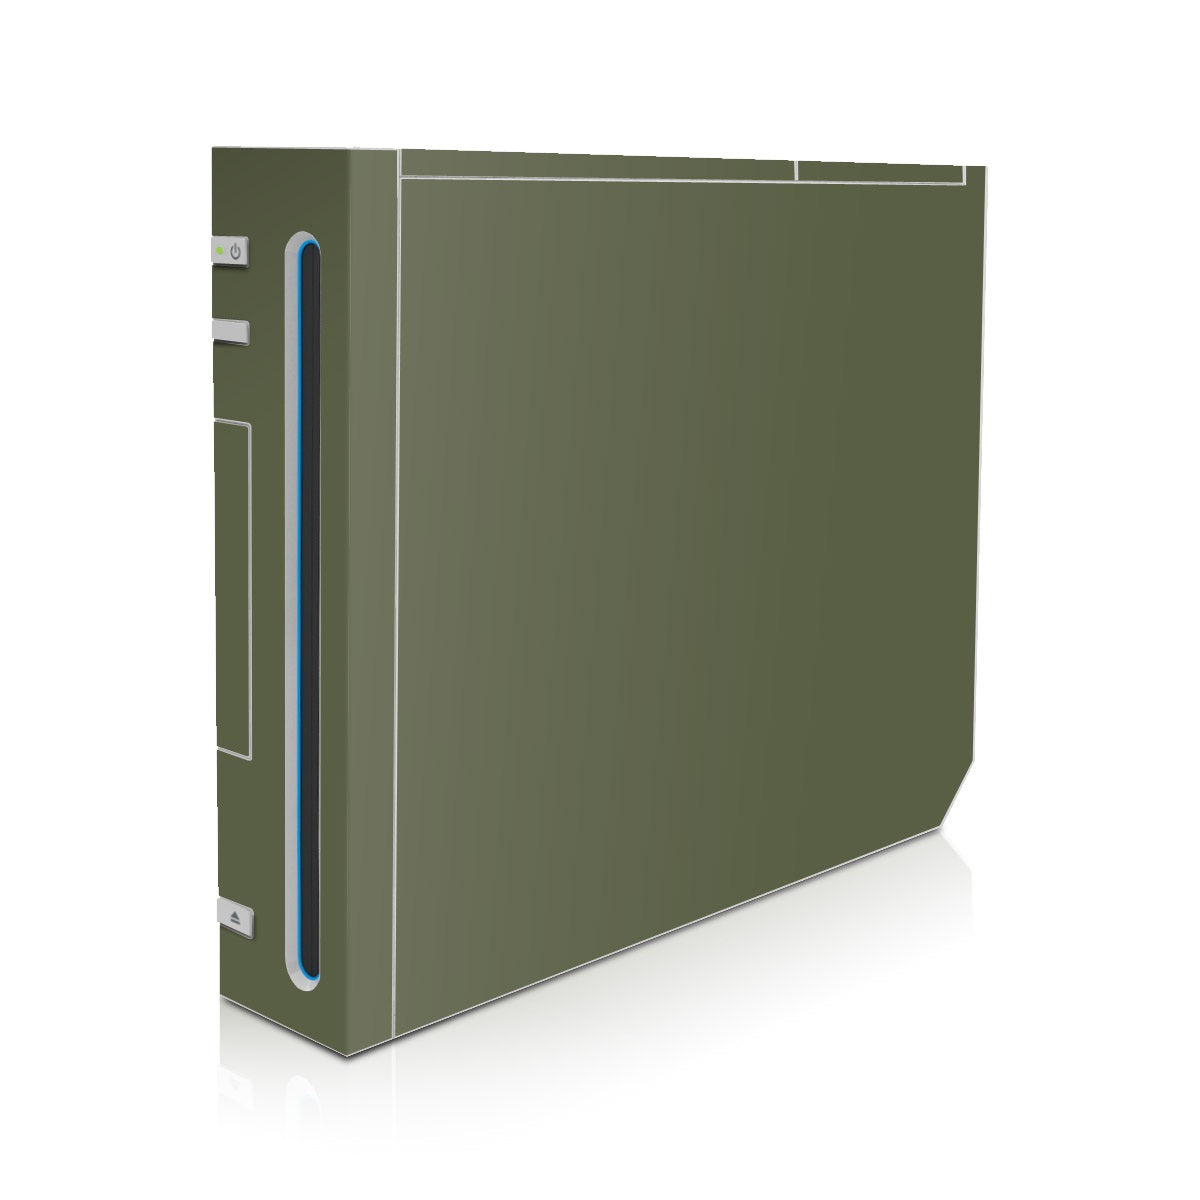 Solid State Olive Drab - Nintendo Wii Skin